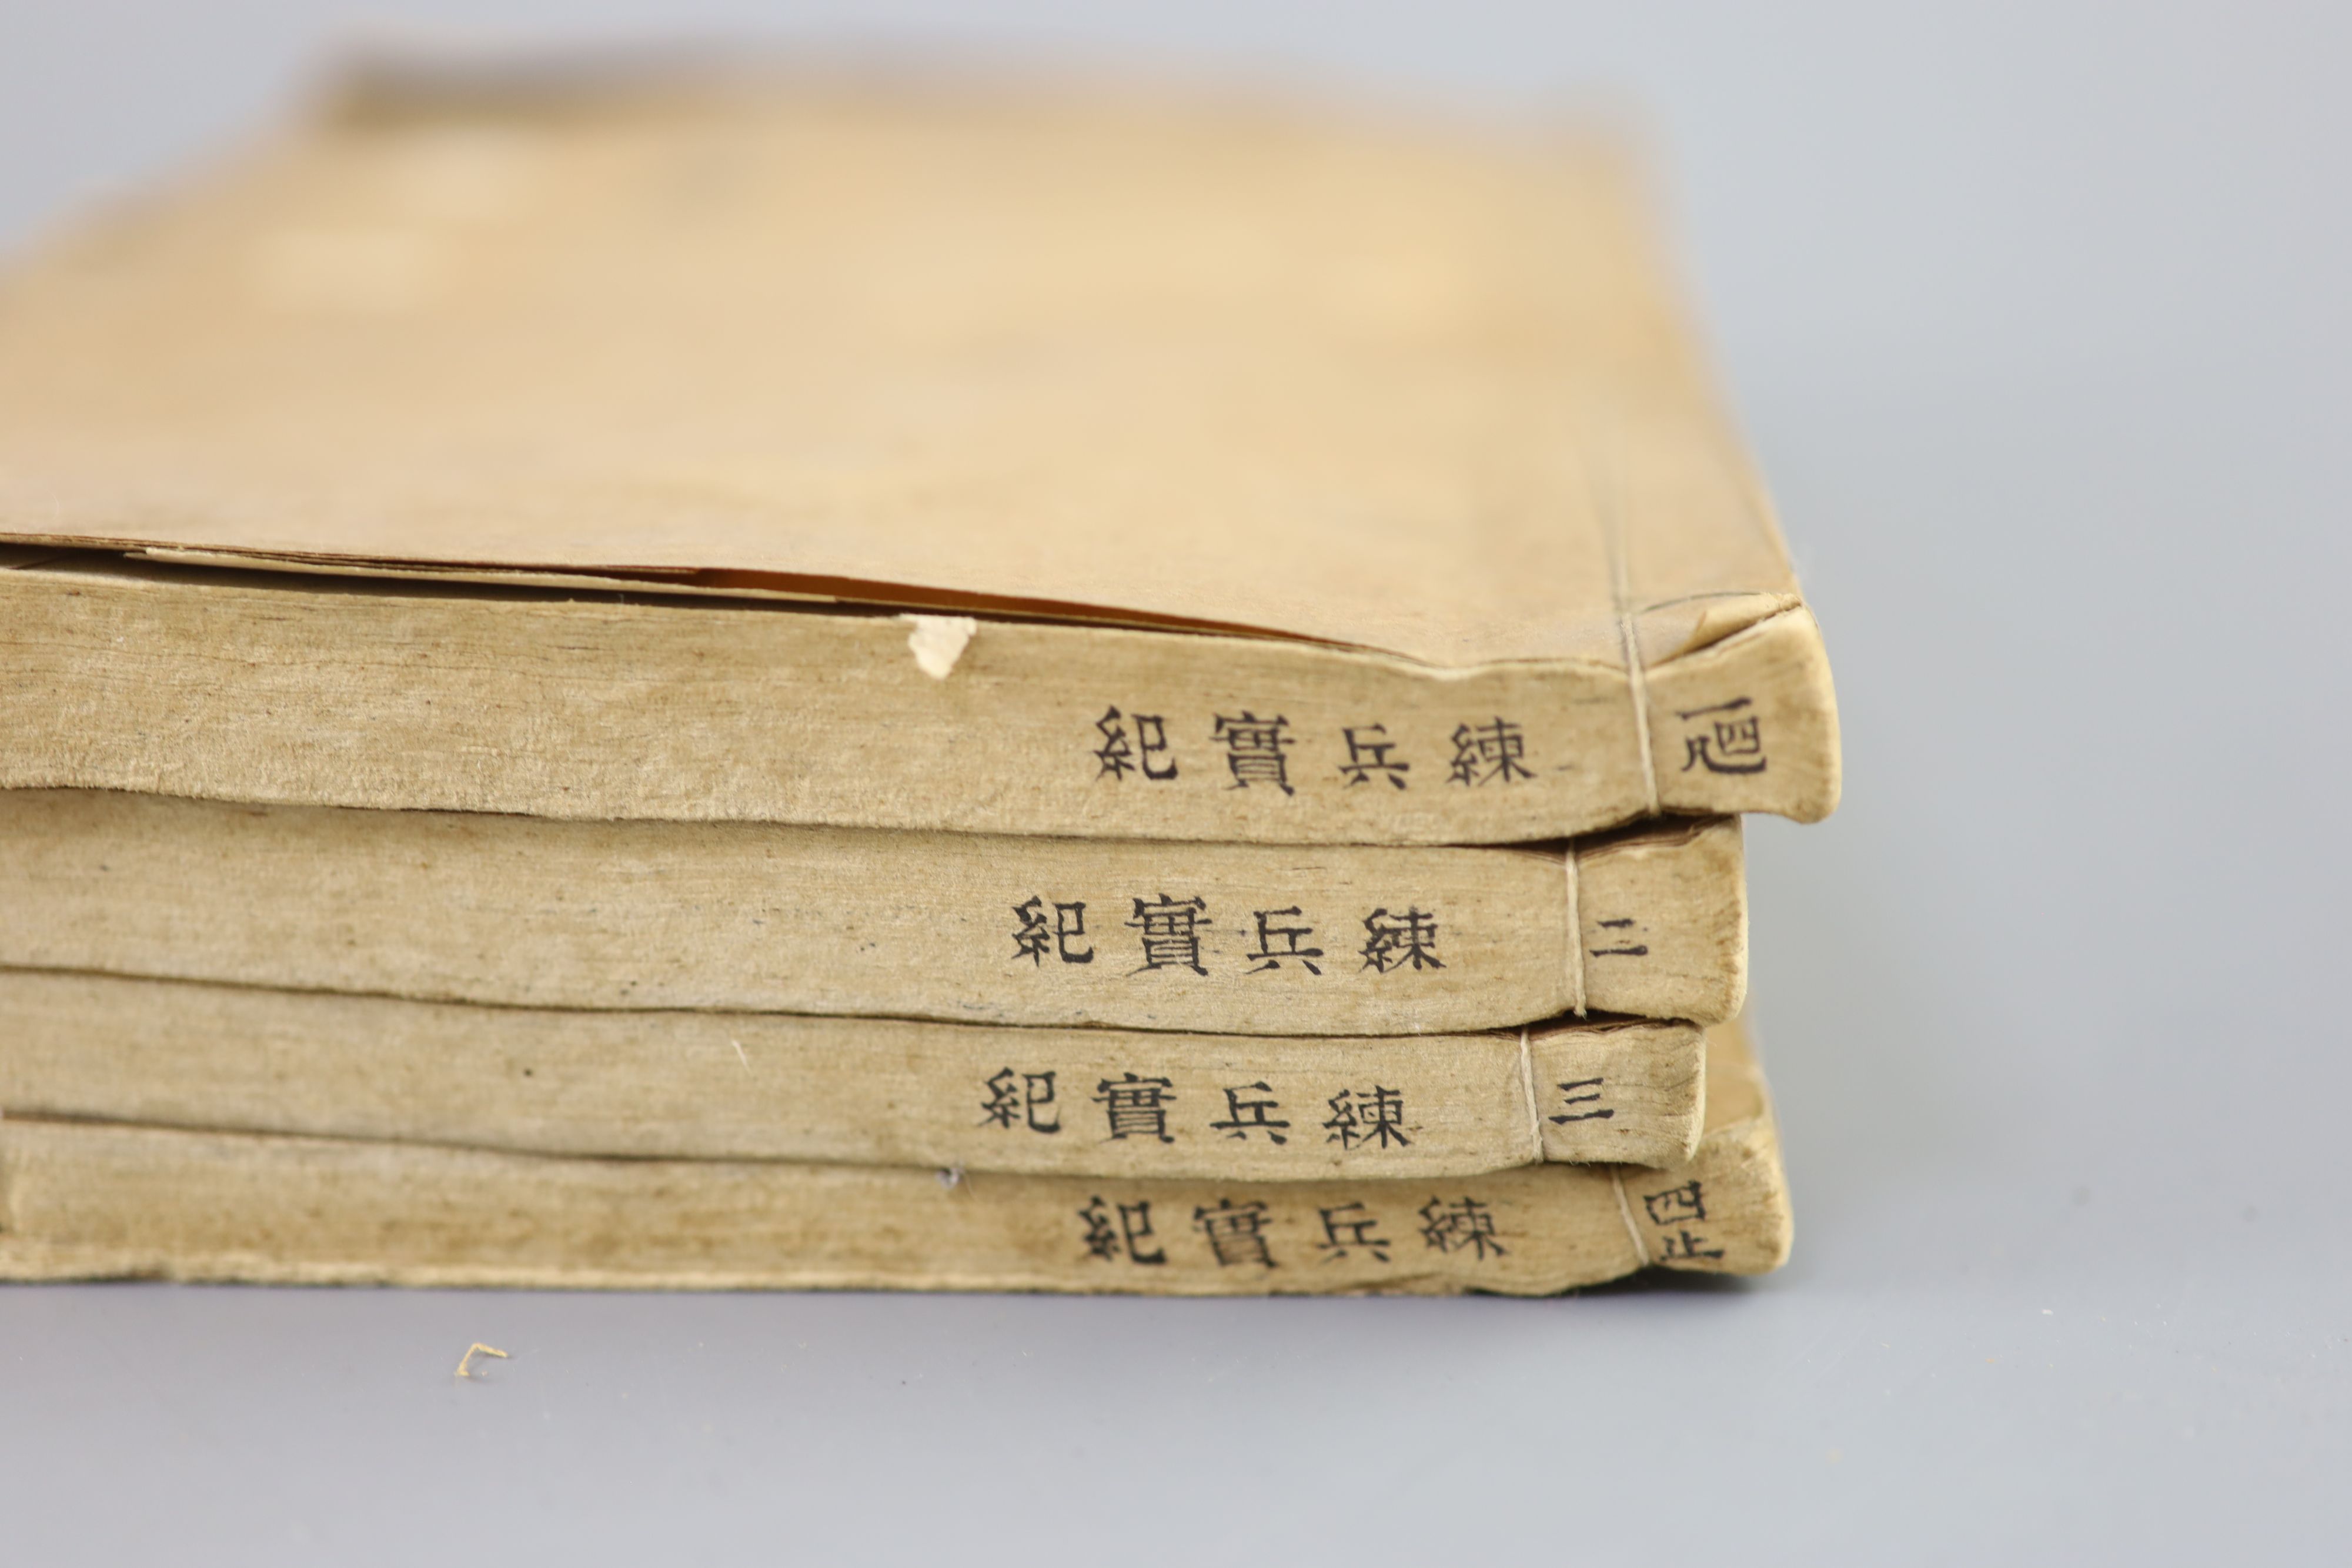 Chinese book, Jiguang Qi, Military Training: Authentic Records Lien ping shih chi, undated but probably Qing dynasty, Provenance - A.